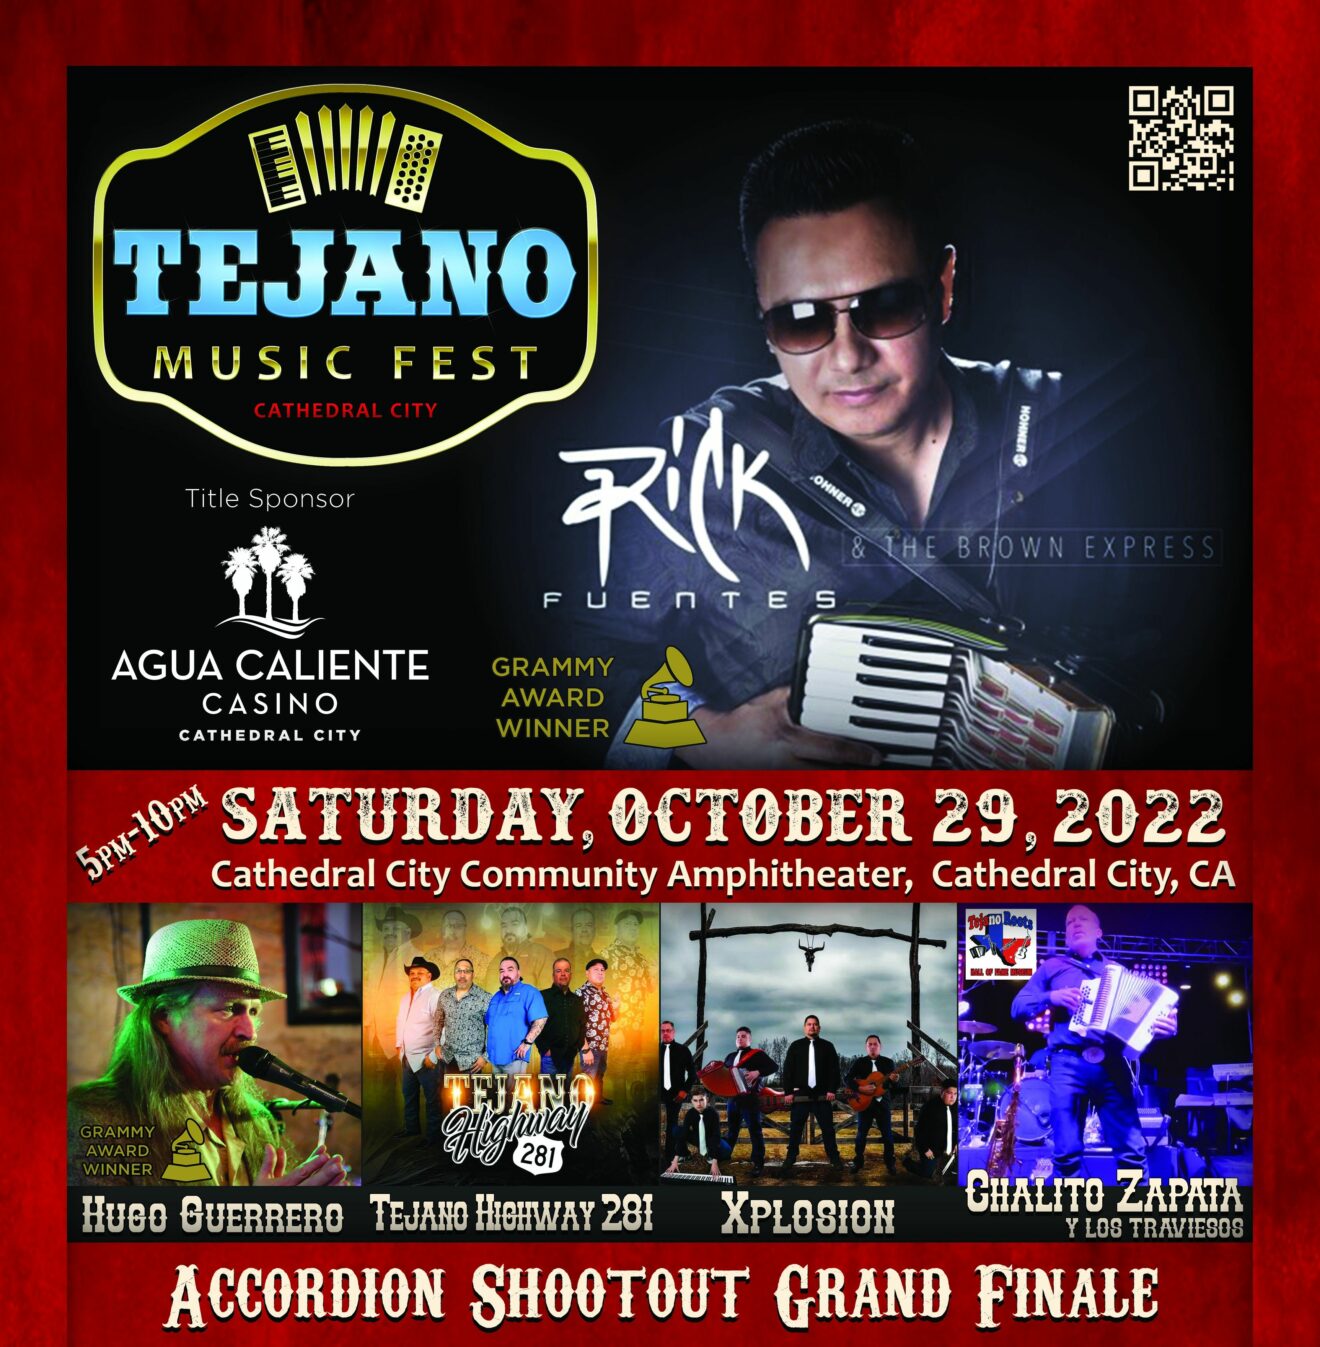 4th Annual Tejano Music Festival Tickets on Sale Now